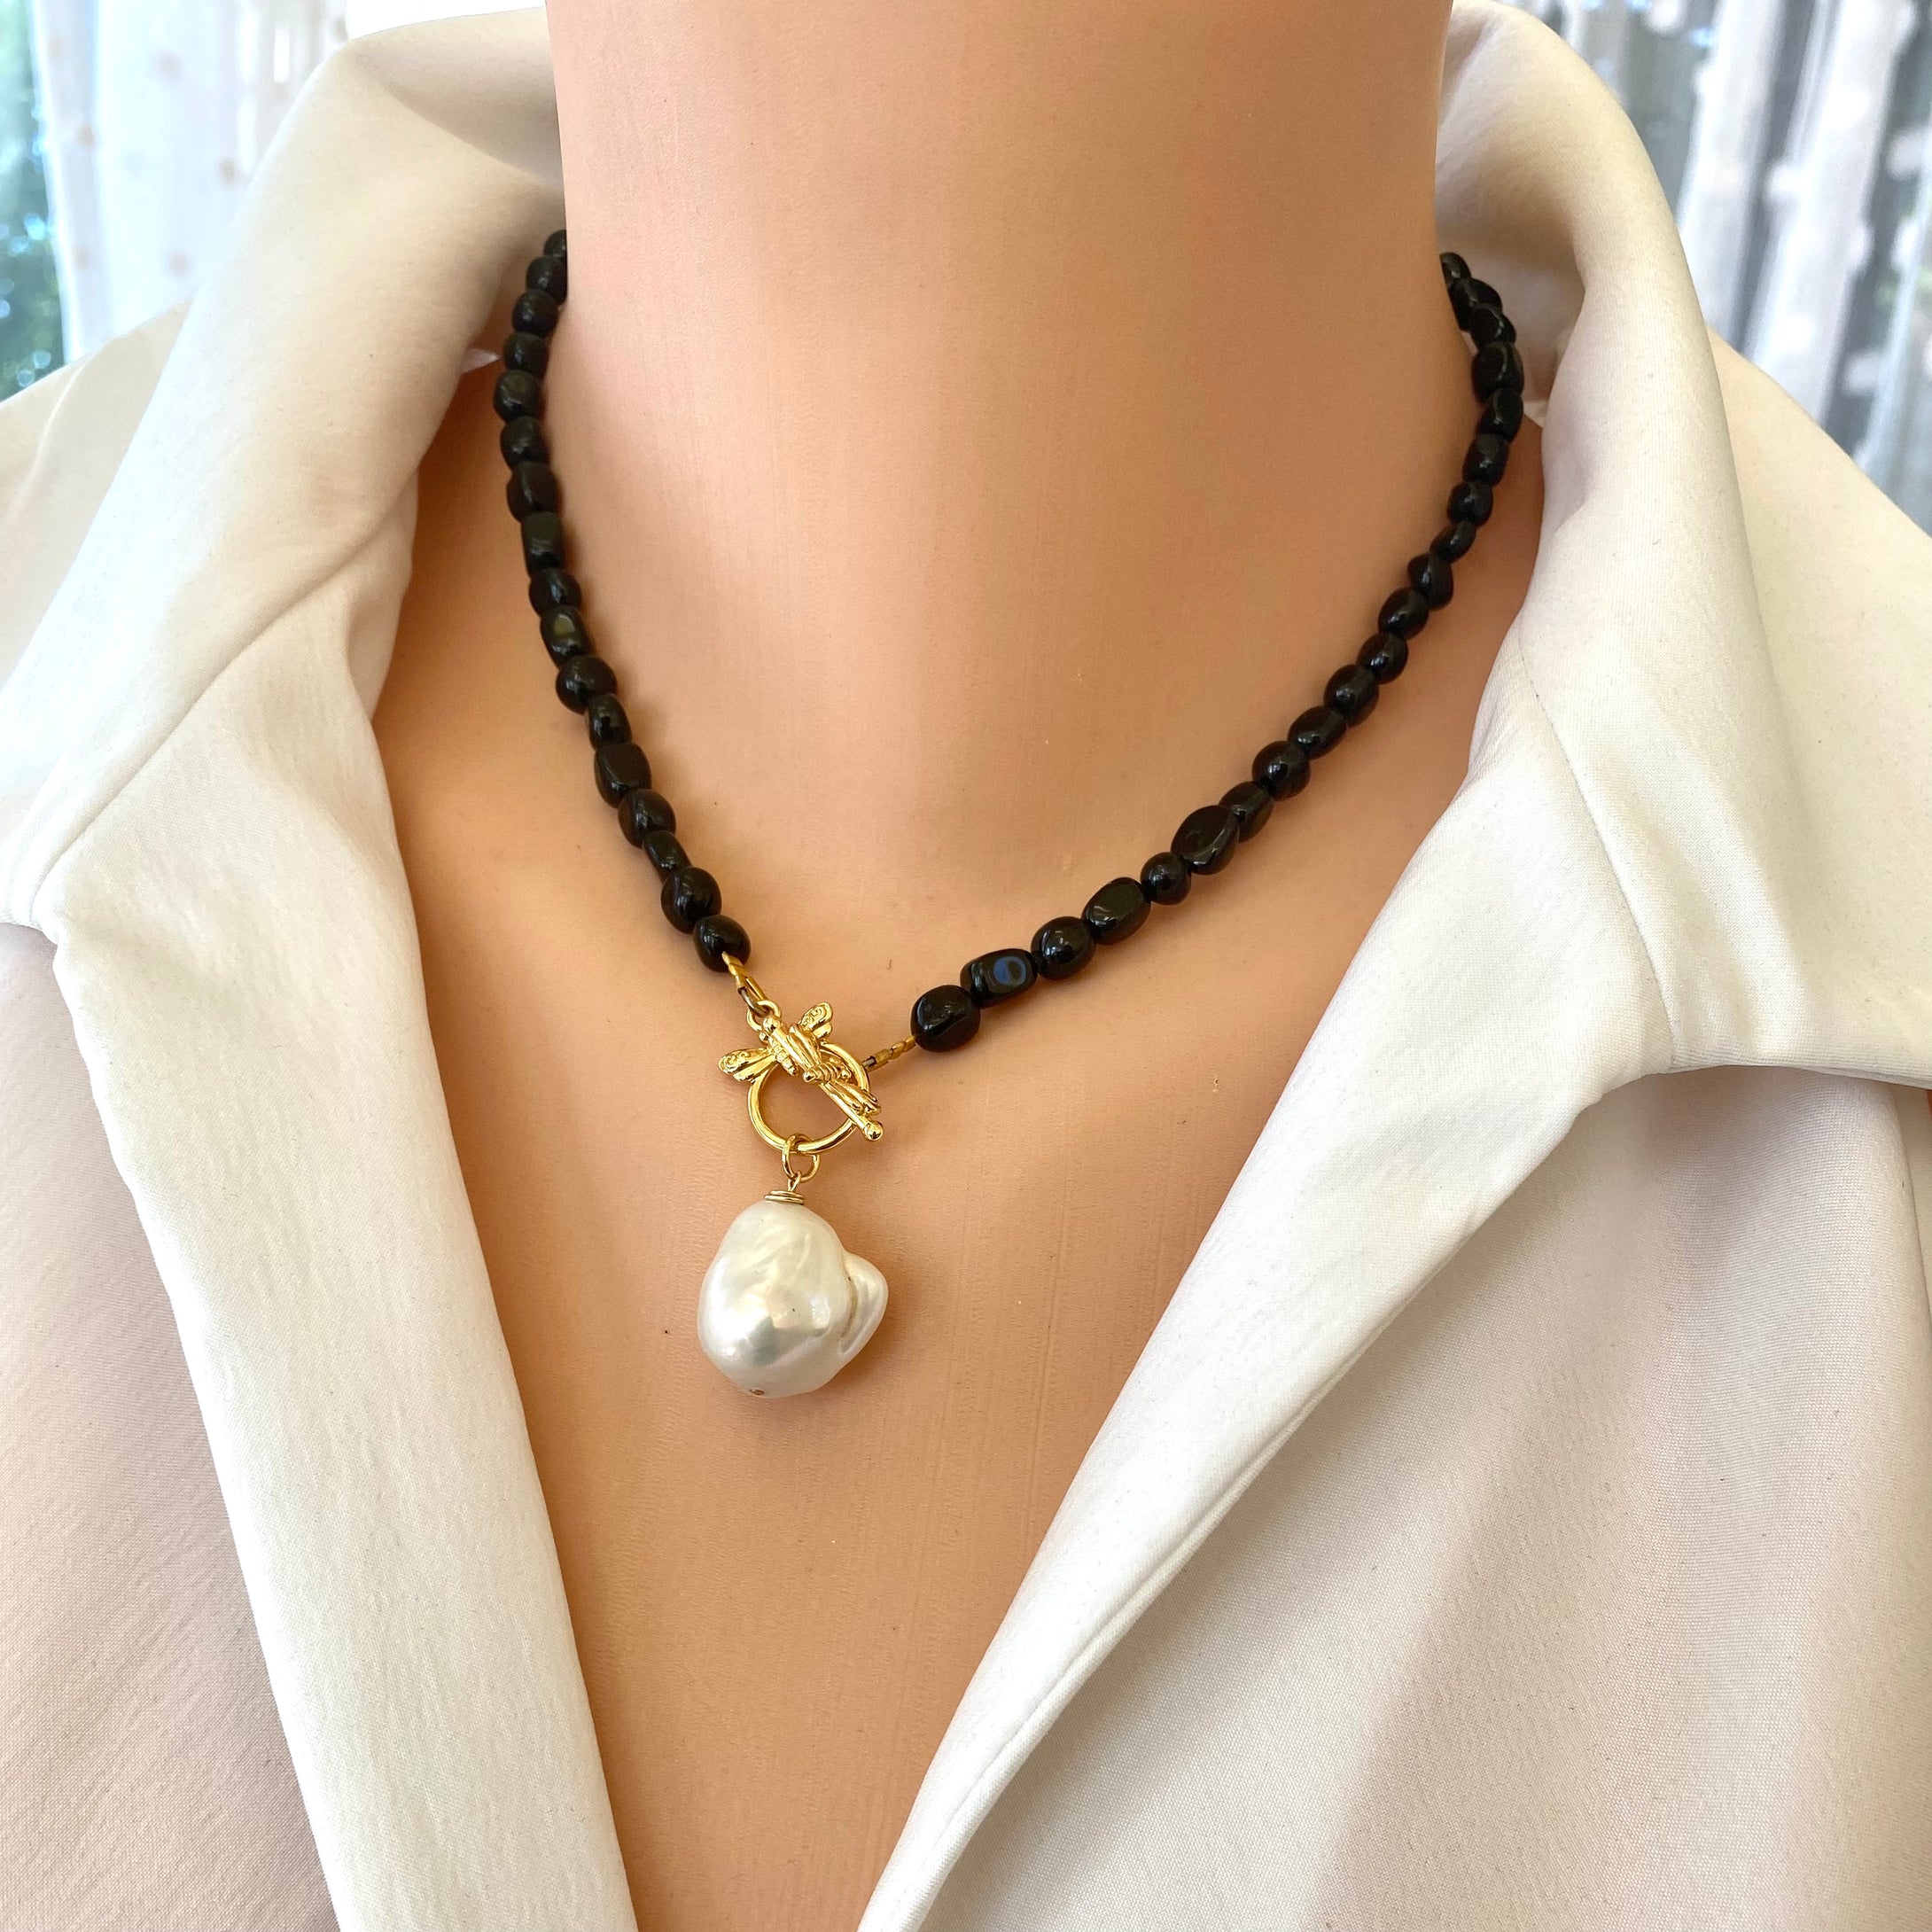 Black Tourmaline and Genuine Baroque Pearl Beaded Necklace with Honey Bees Toggle Clasp, 17